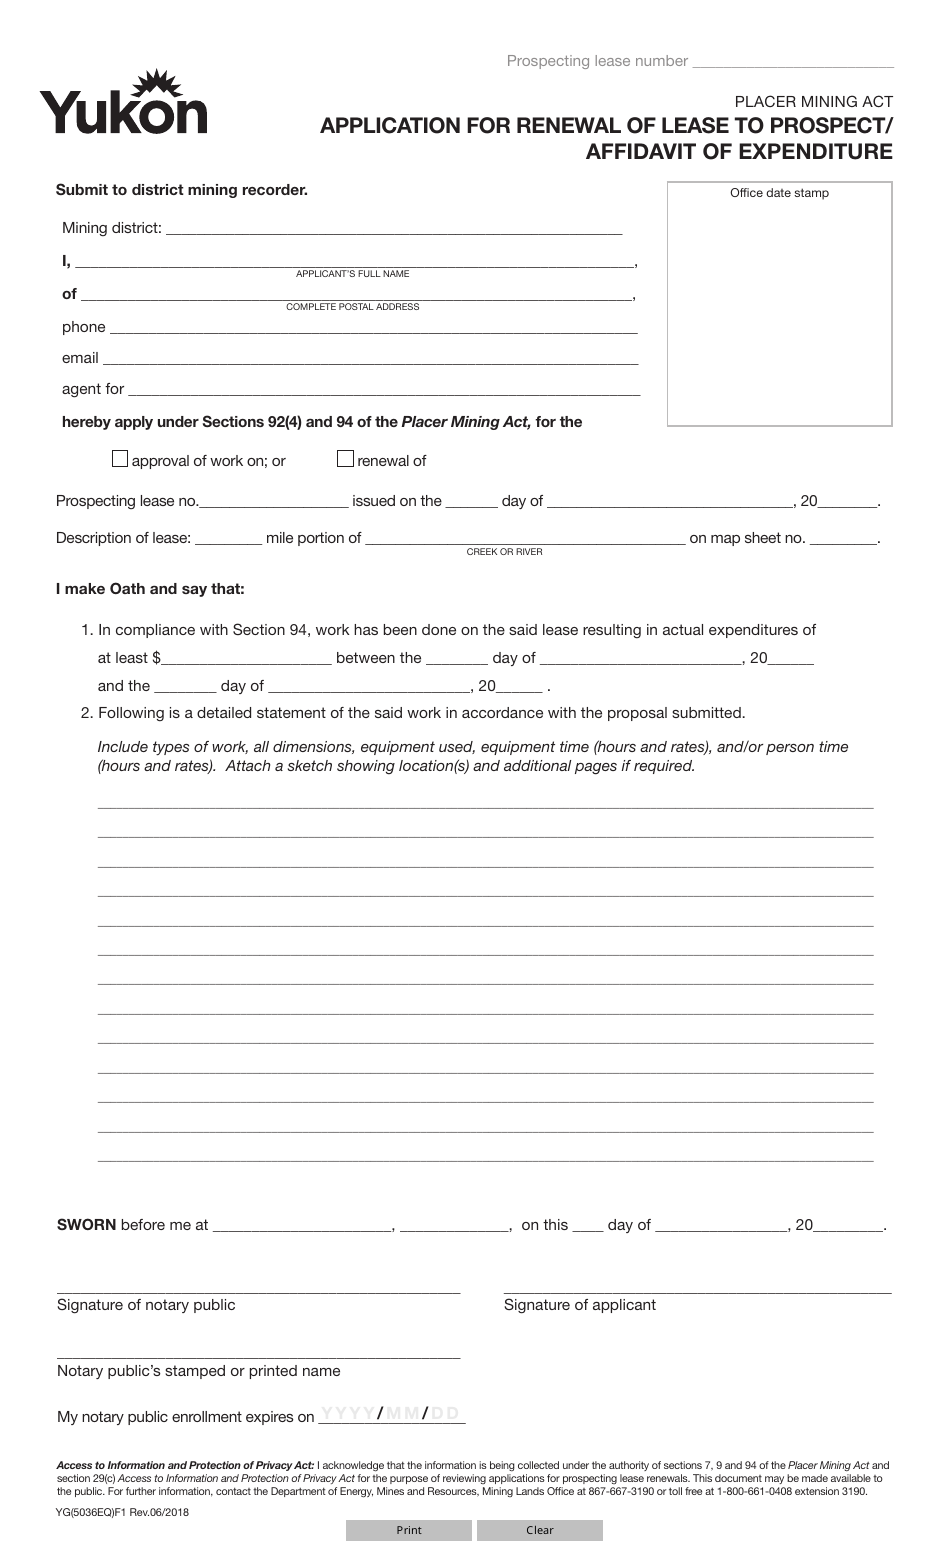 Form YG5036 Application for Renewal of Lease to Prospect / Affidavit of Expenditure - Yukon, Canada, Page 1